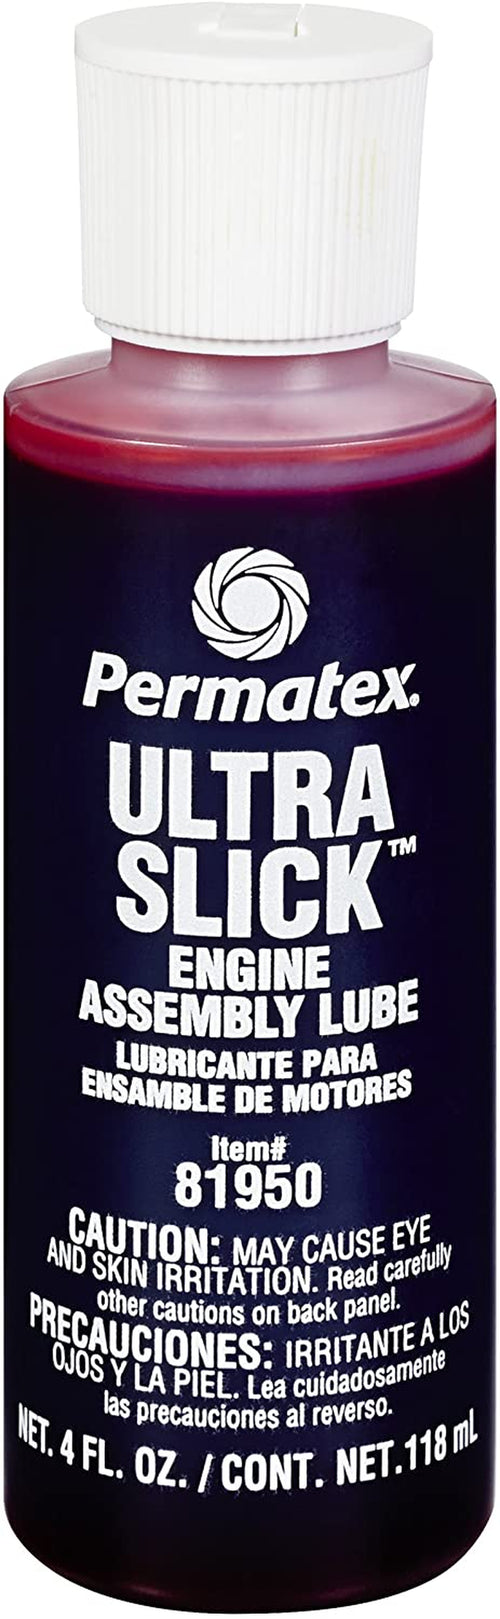 Permatex 81950-12PK Ultra Slick Engine Assembly Lube, 4 Oz. (Pack of 12)